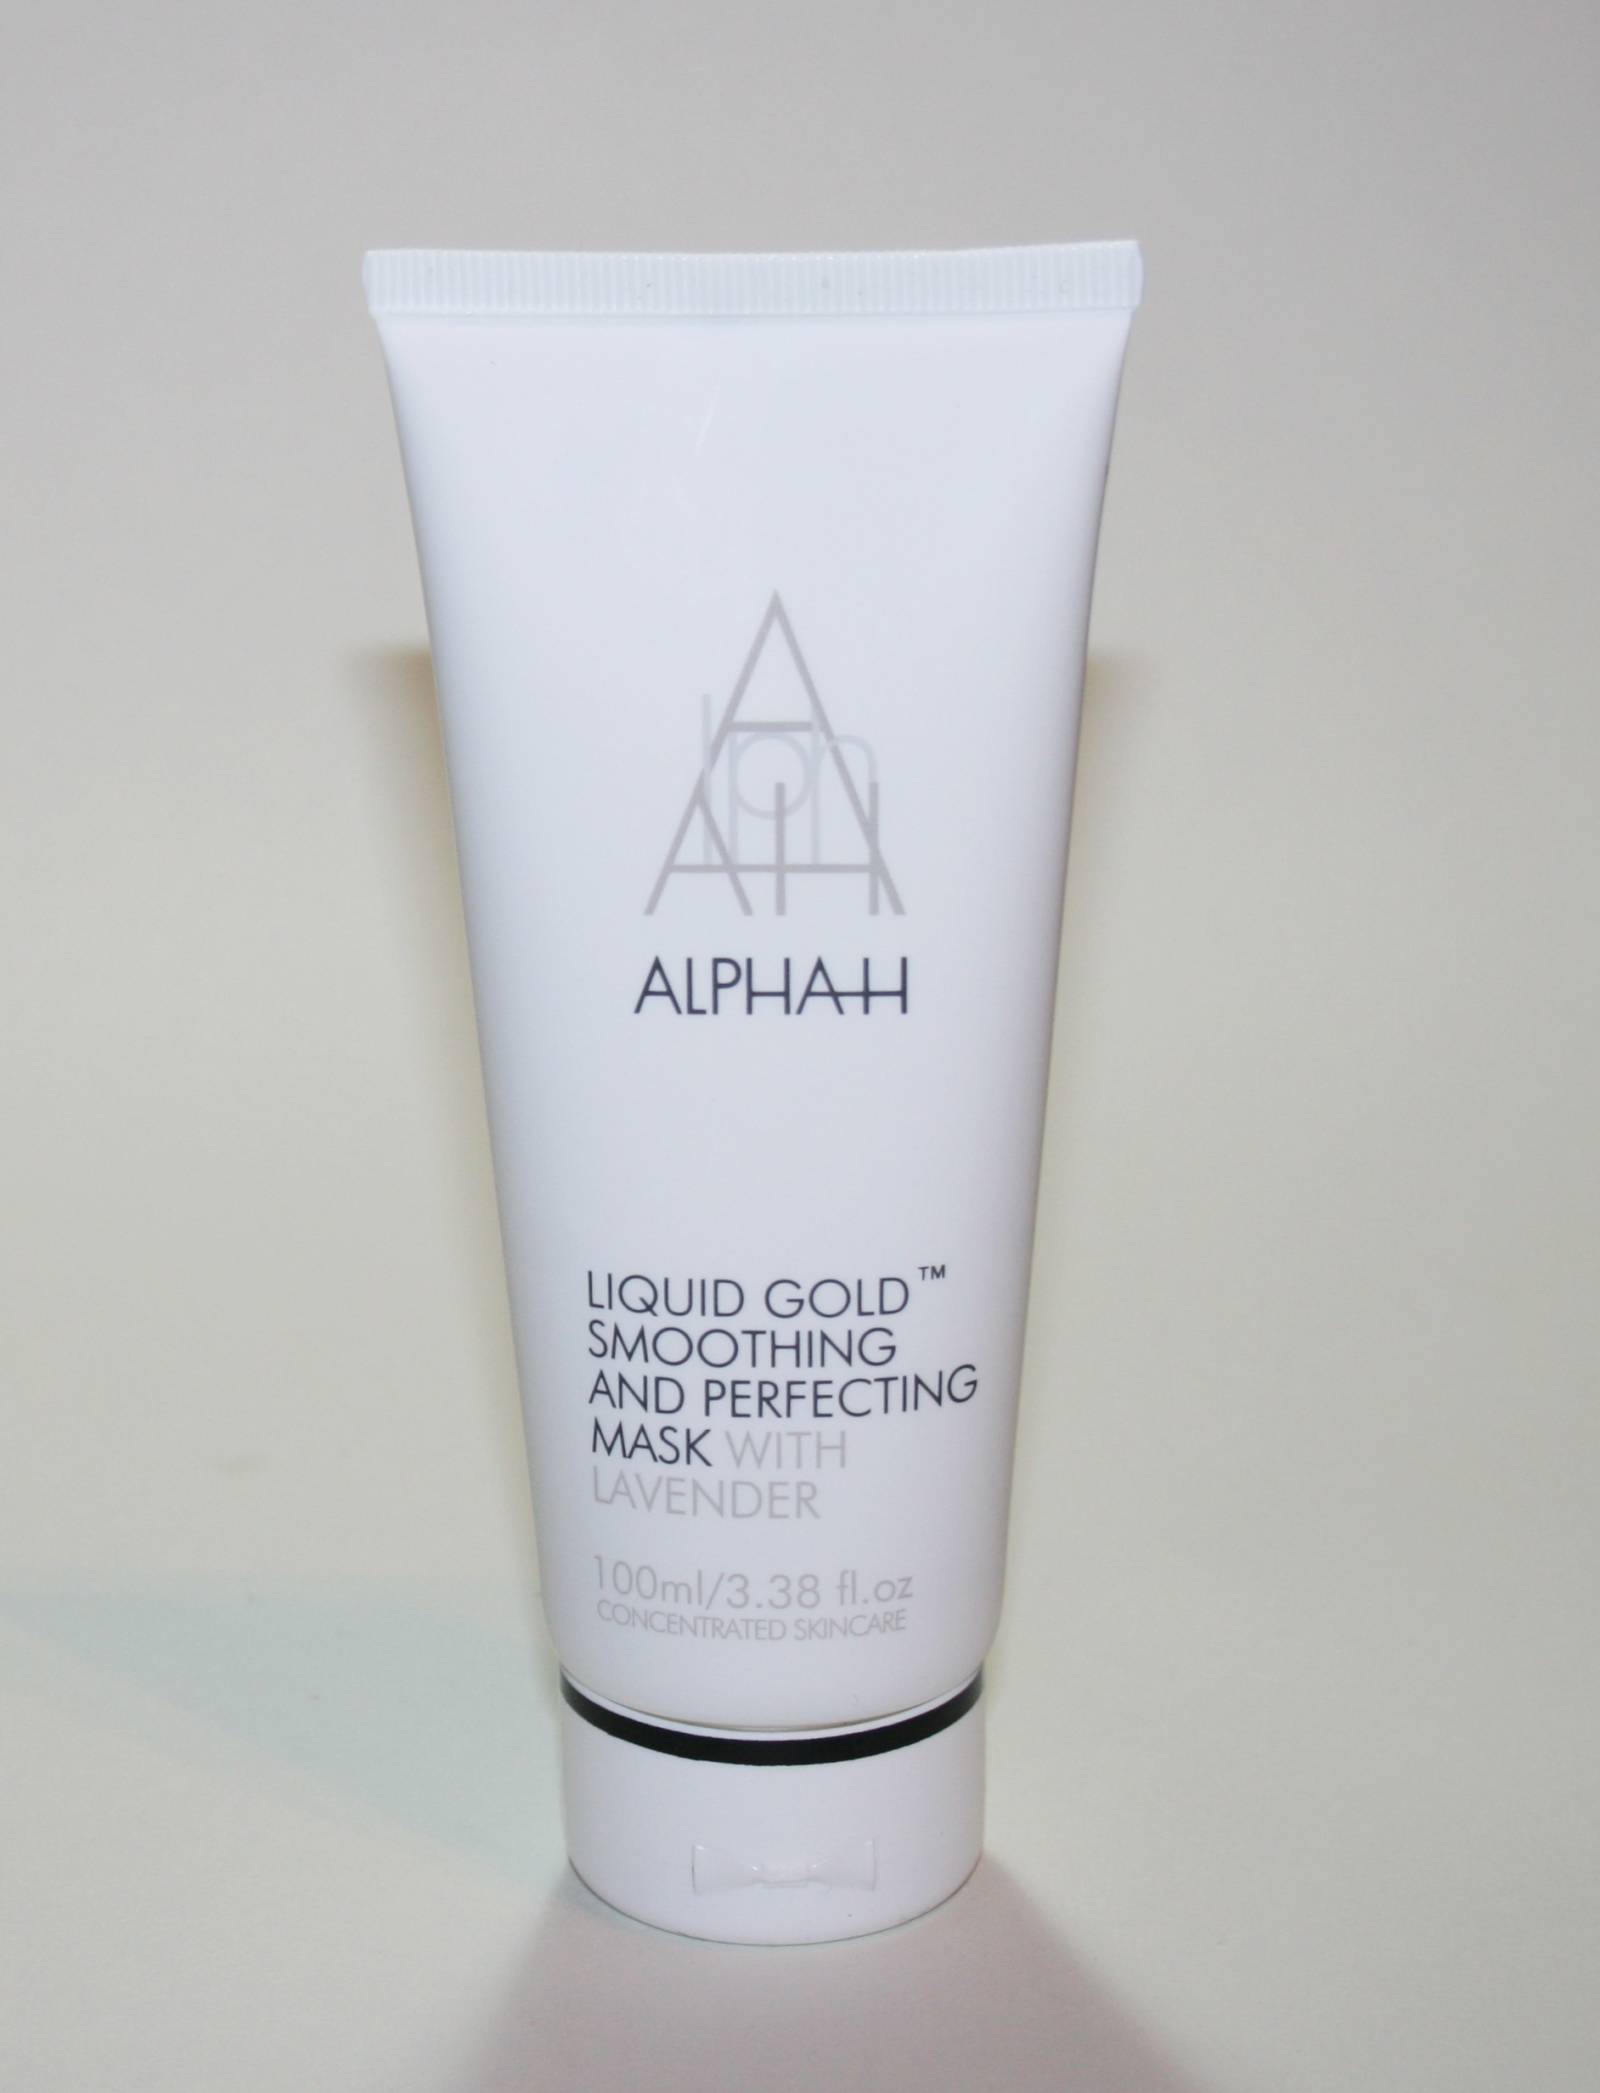 Alpha-H Liquid Gold review: Is it worth the money?